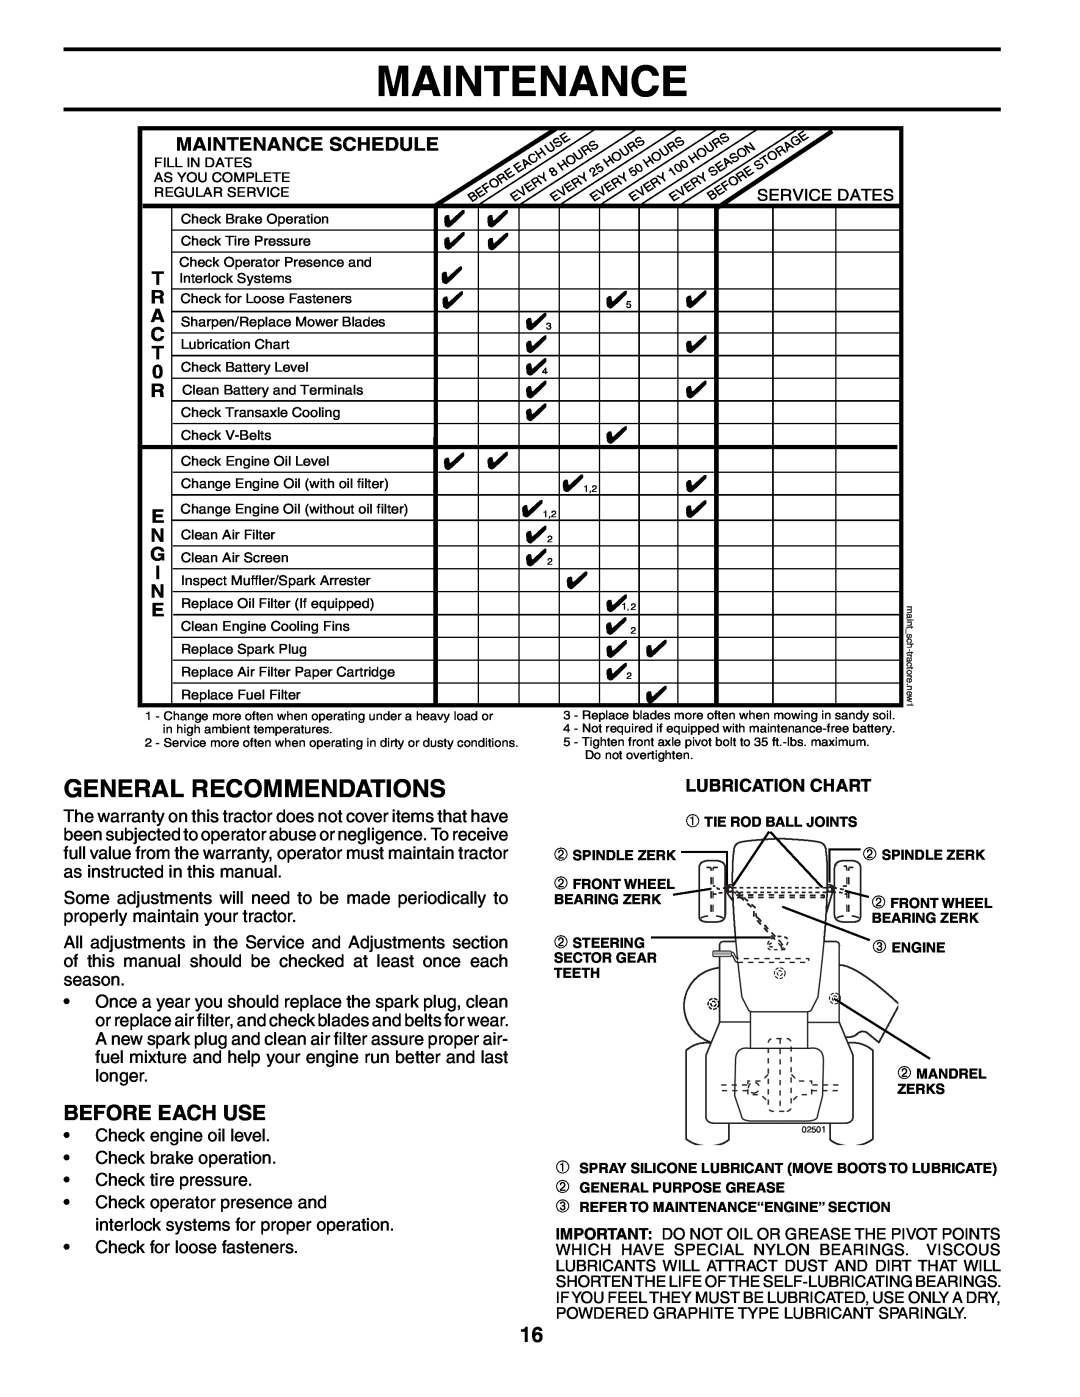 Poulan PDGT26H48B owner manual General Recommendations, Before Each Use, Maintenance Schedule 